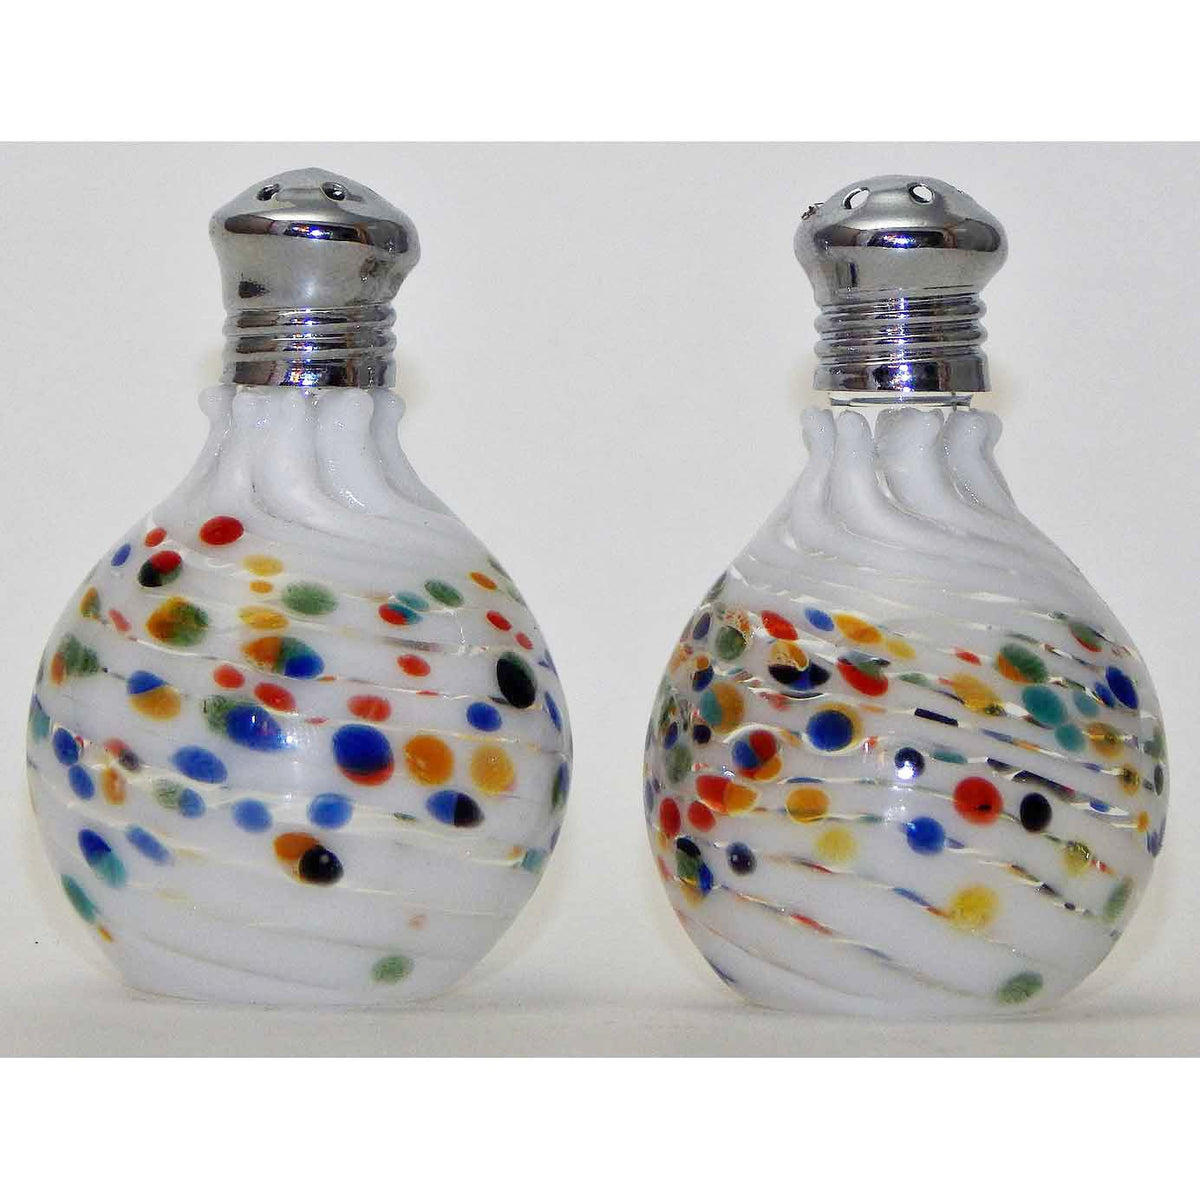 http://www.sweetheartgallery.com/cdn/shop/products/Four-Sisters-Art-Glass-White-Multi-Freckle-Blown-Glass-Salt-and-Pepper-Shaker-308-Artistic-Handblown-Art-Glass_ad6a53b7-565a-4842-b3c7-8e7ed5d600a3_1200x1200.jpg?v=1589924249